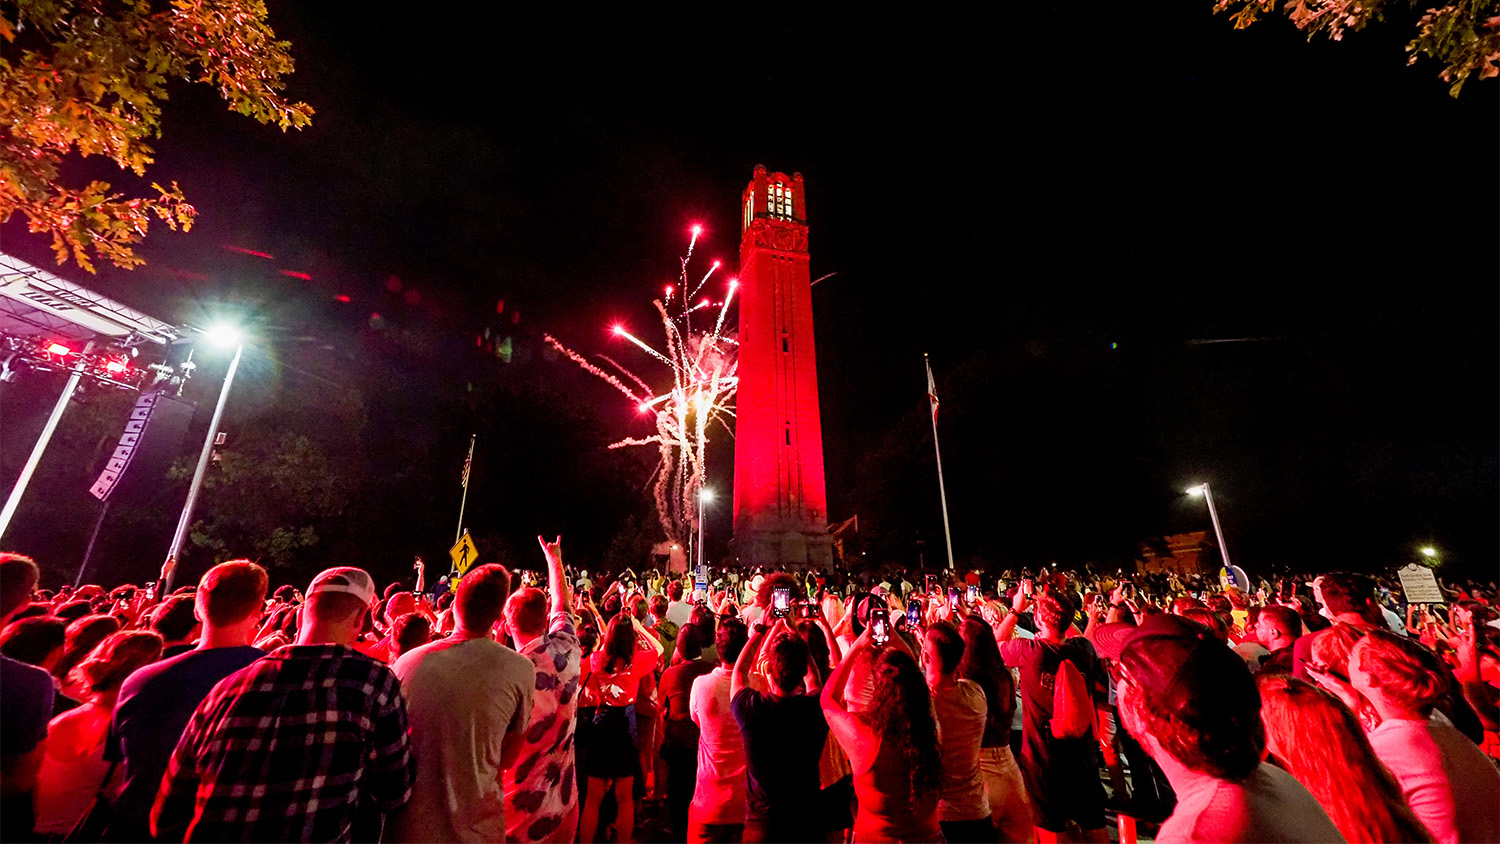 The Memorial Belltower at night, illuminated in red with lots of students at the bottom